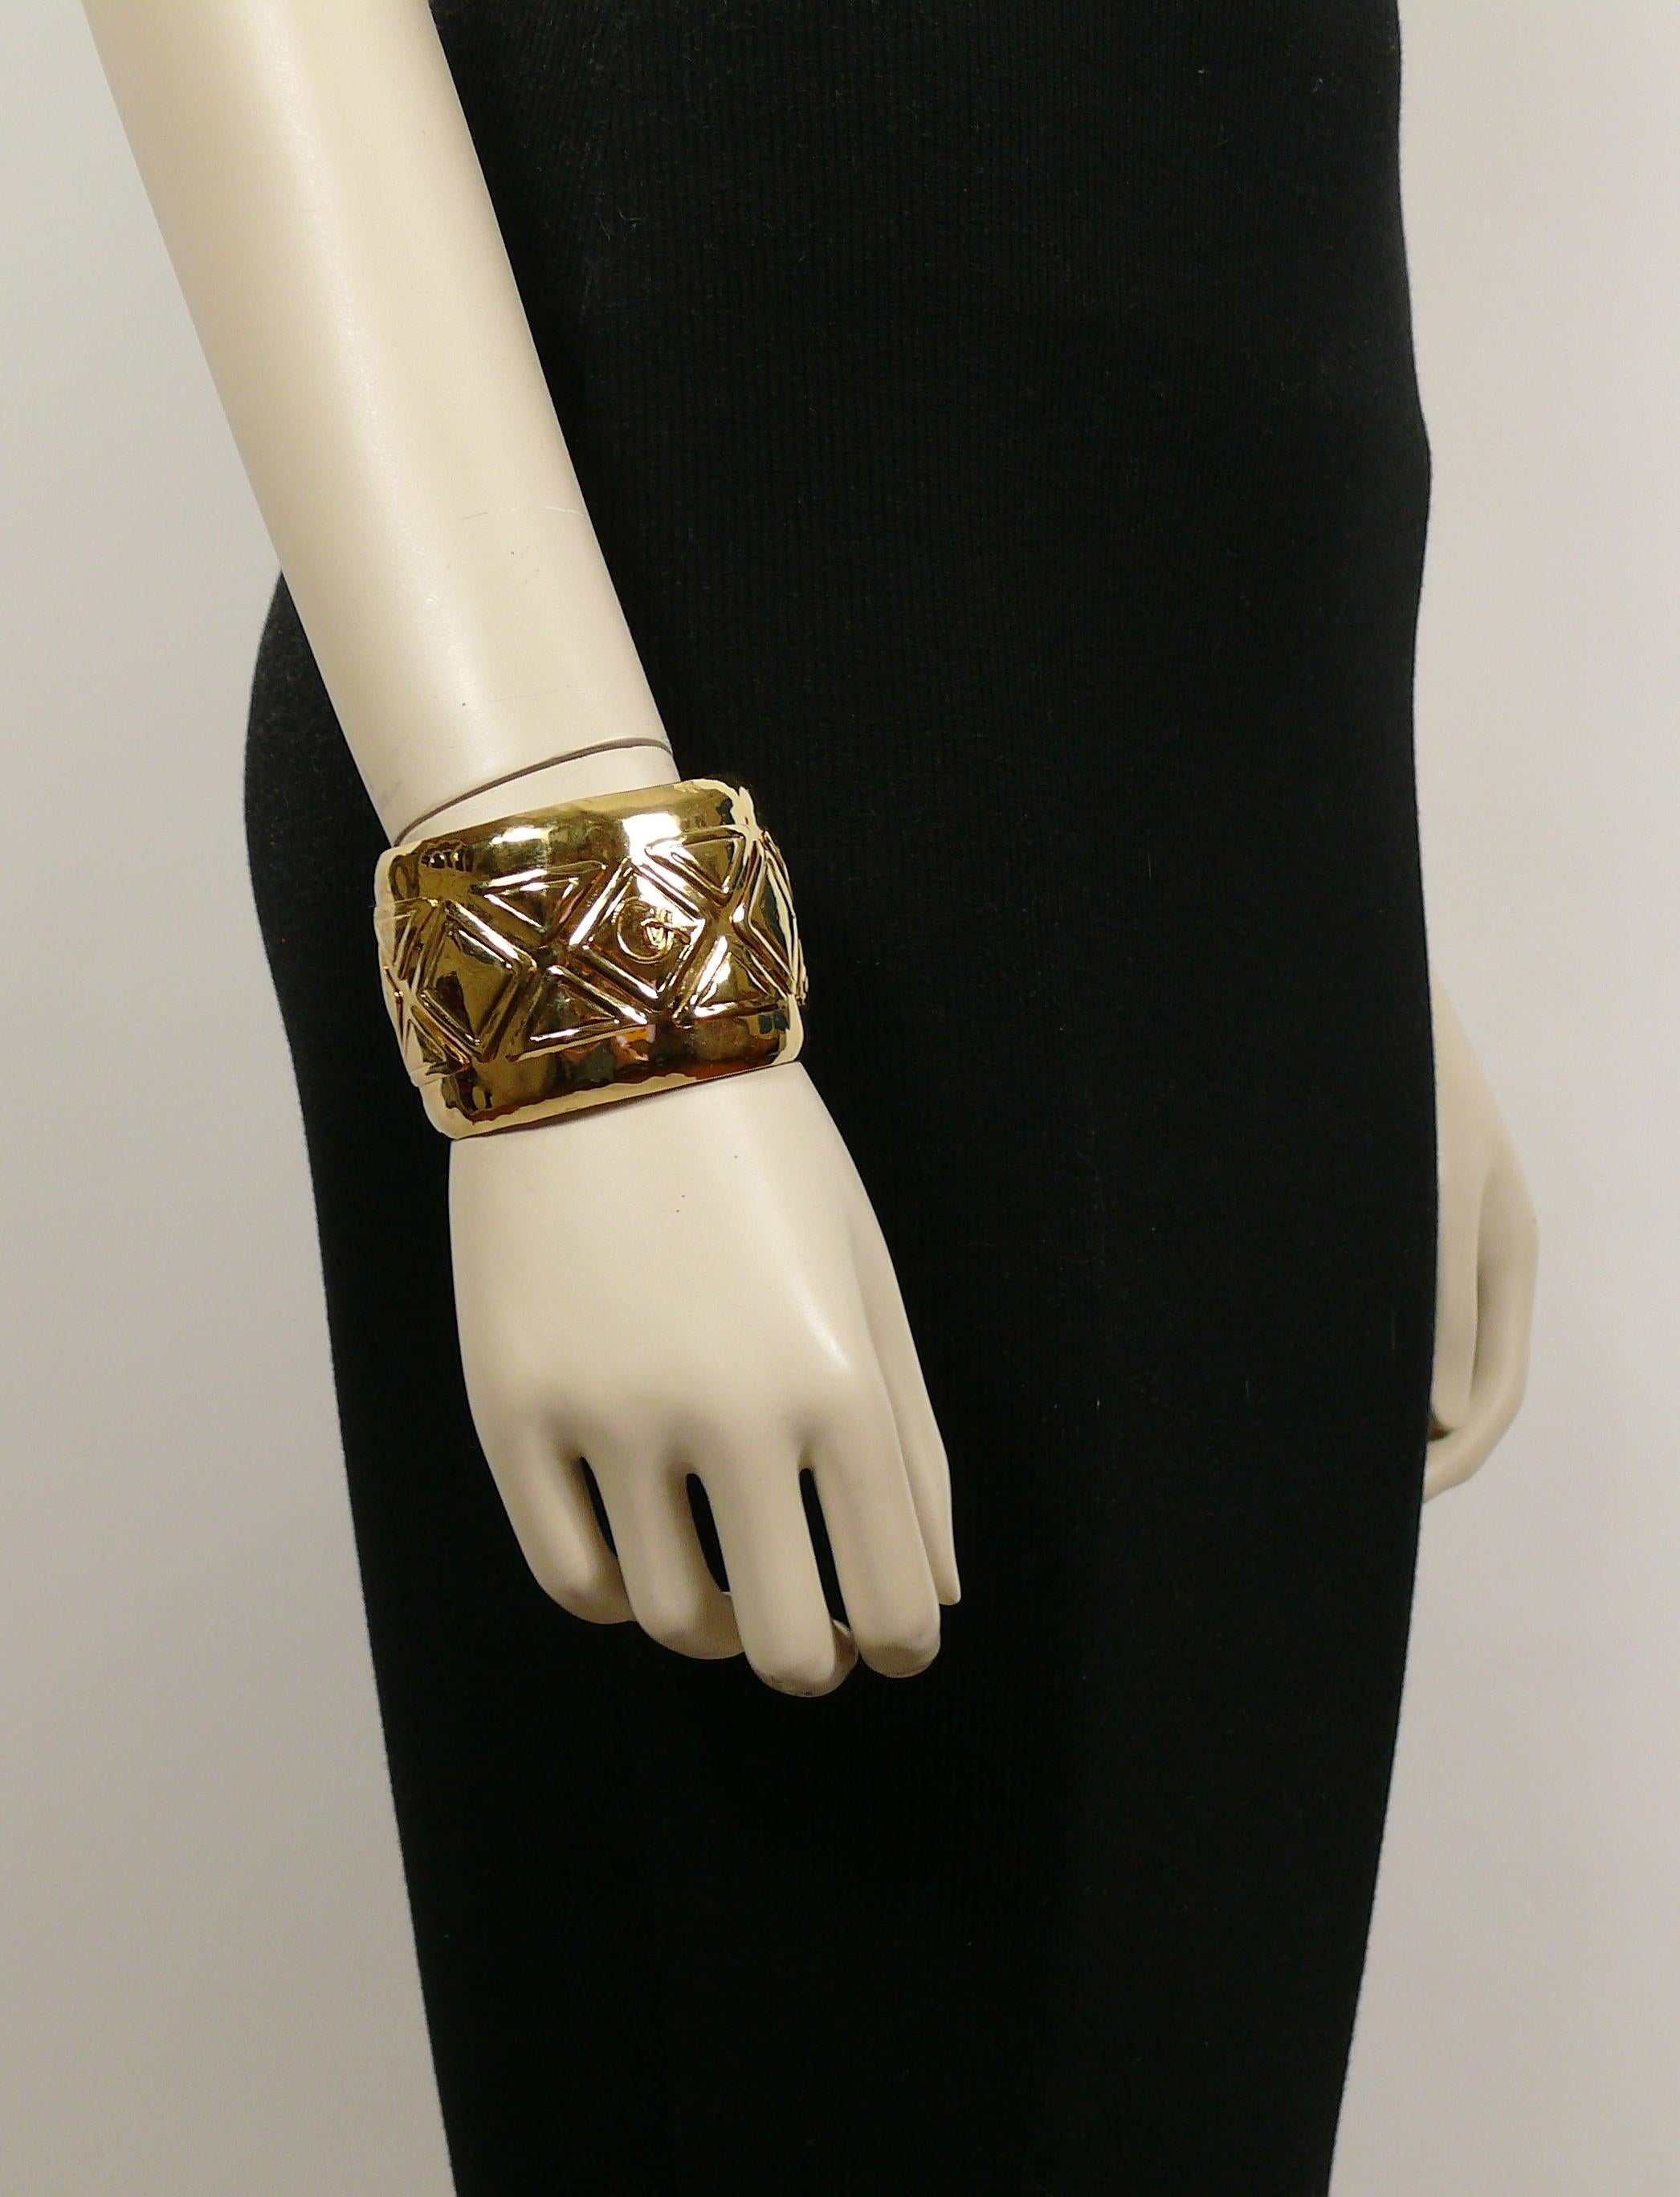 CHRISTIAN LACROIX vintage gold toned cuff bracelet featuring a geometric pattern and CL logo.

Marked CHRISTIAN LACROIX CL Made in France.

Indicative measurements : inner measurements approx. 6.2 cm x 5.1 cm (2.44 inches x 2 inches) / width approx.